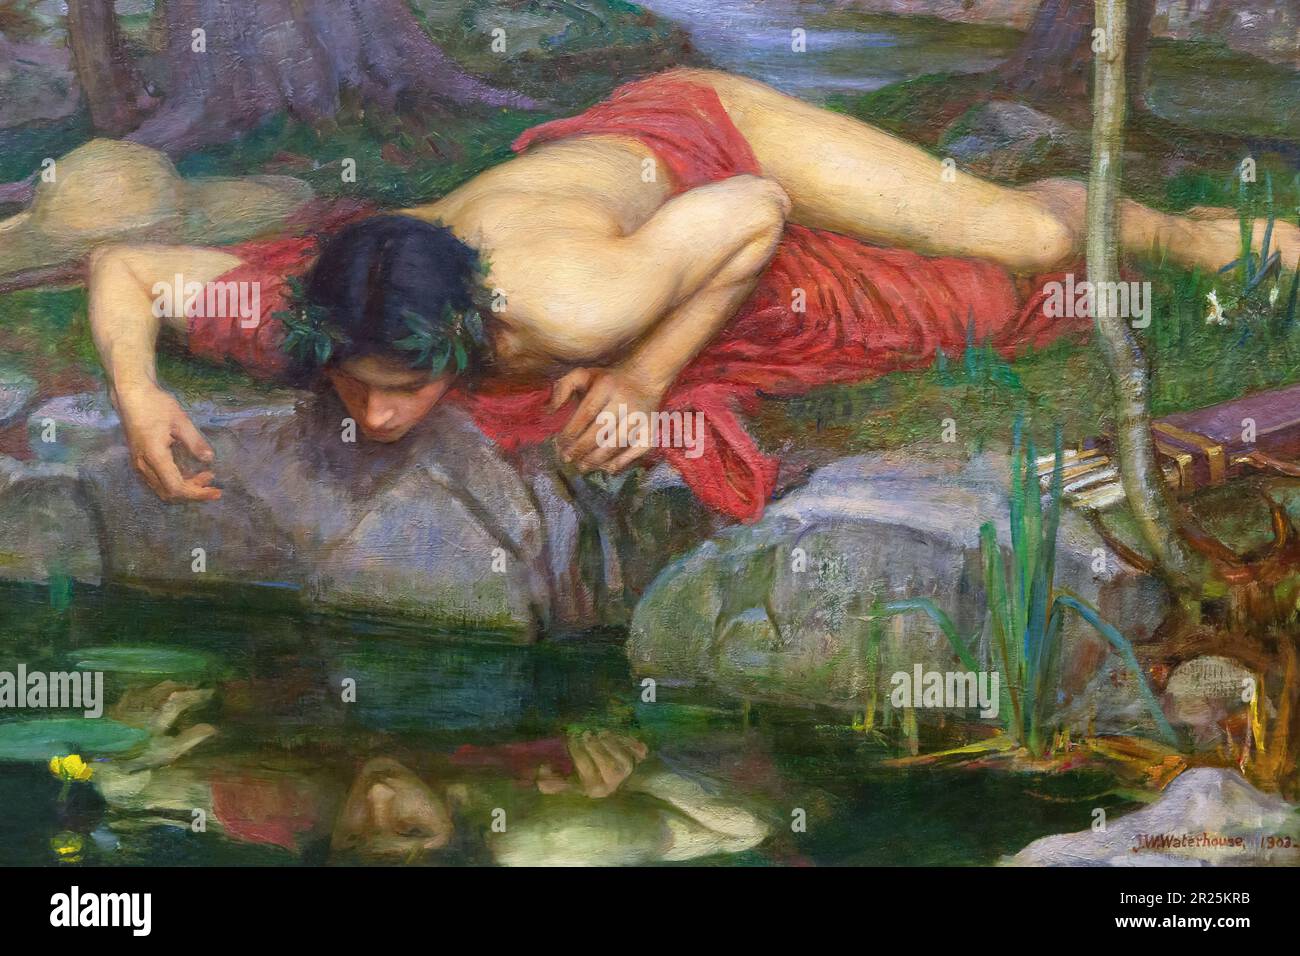 Narcissus, detail from Echo and Narcissus, John William Waterhouse, 1903, Stock Photo